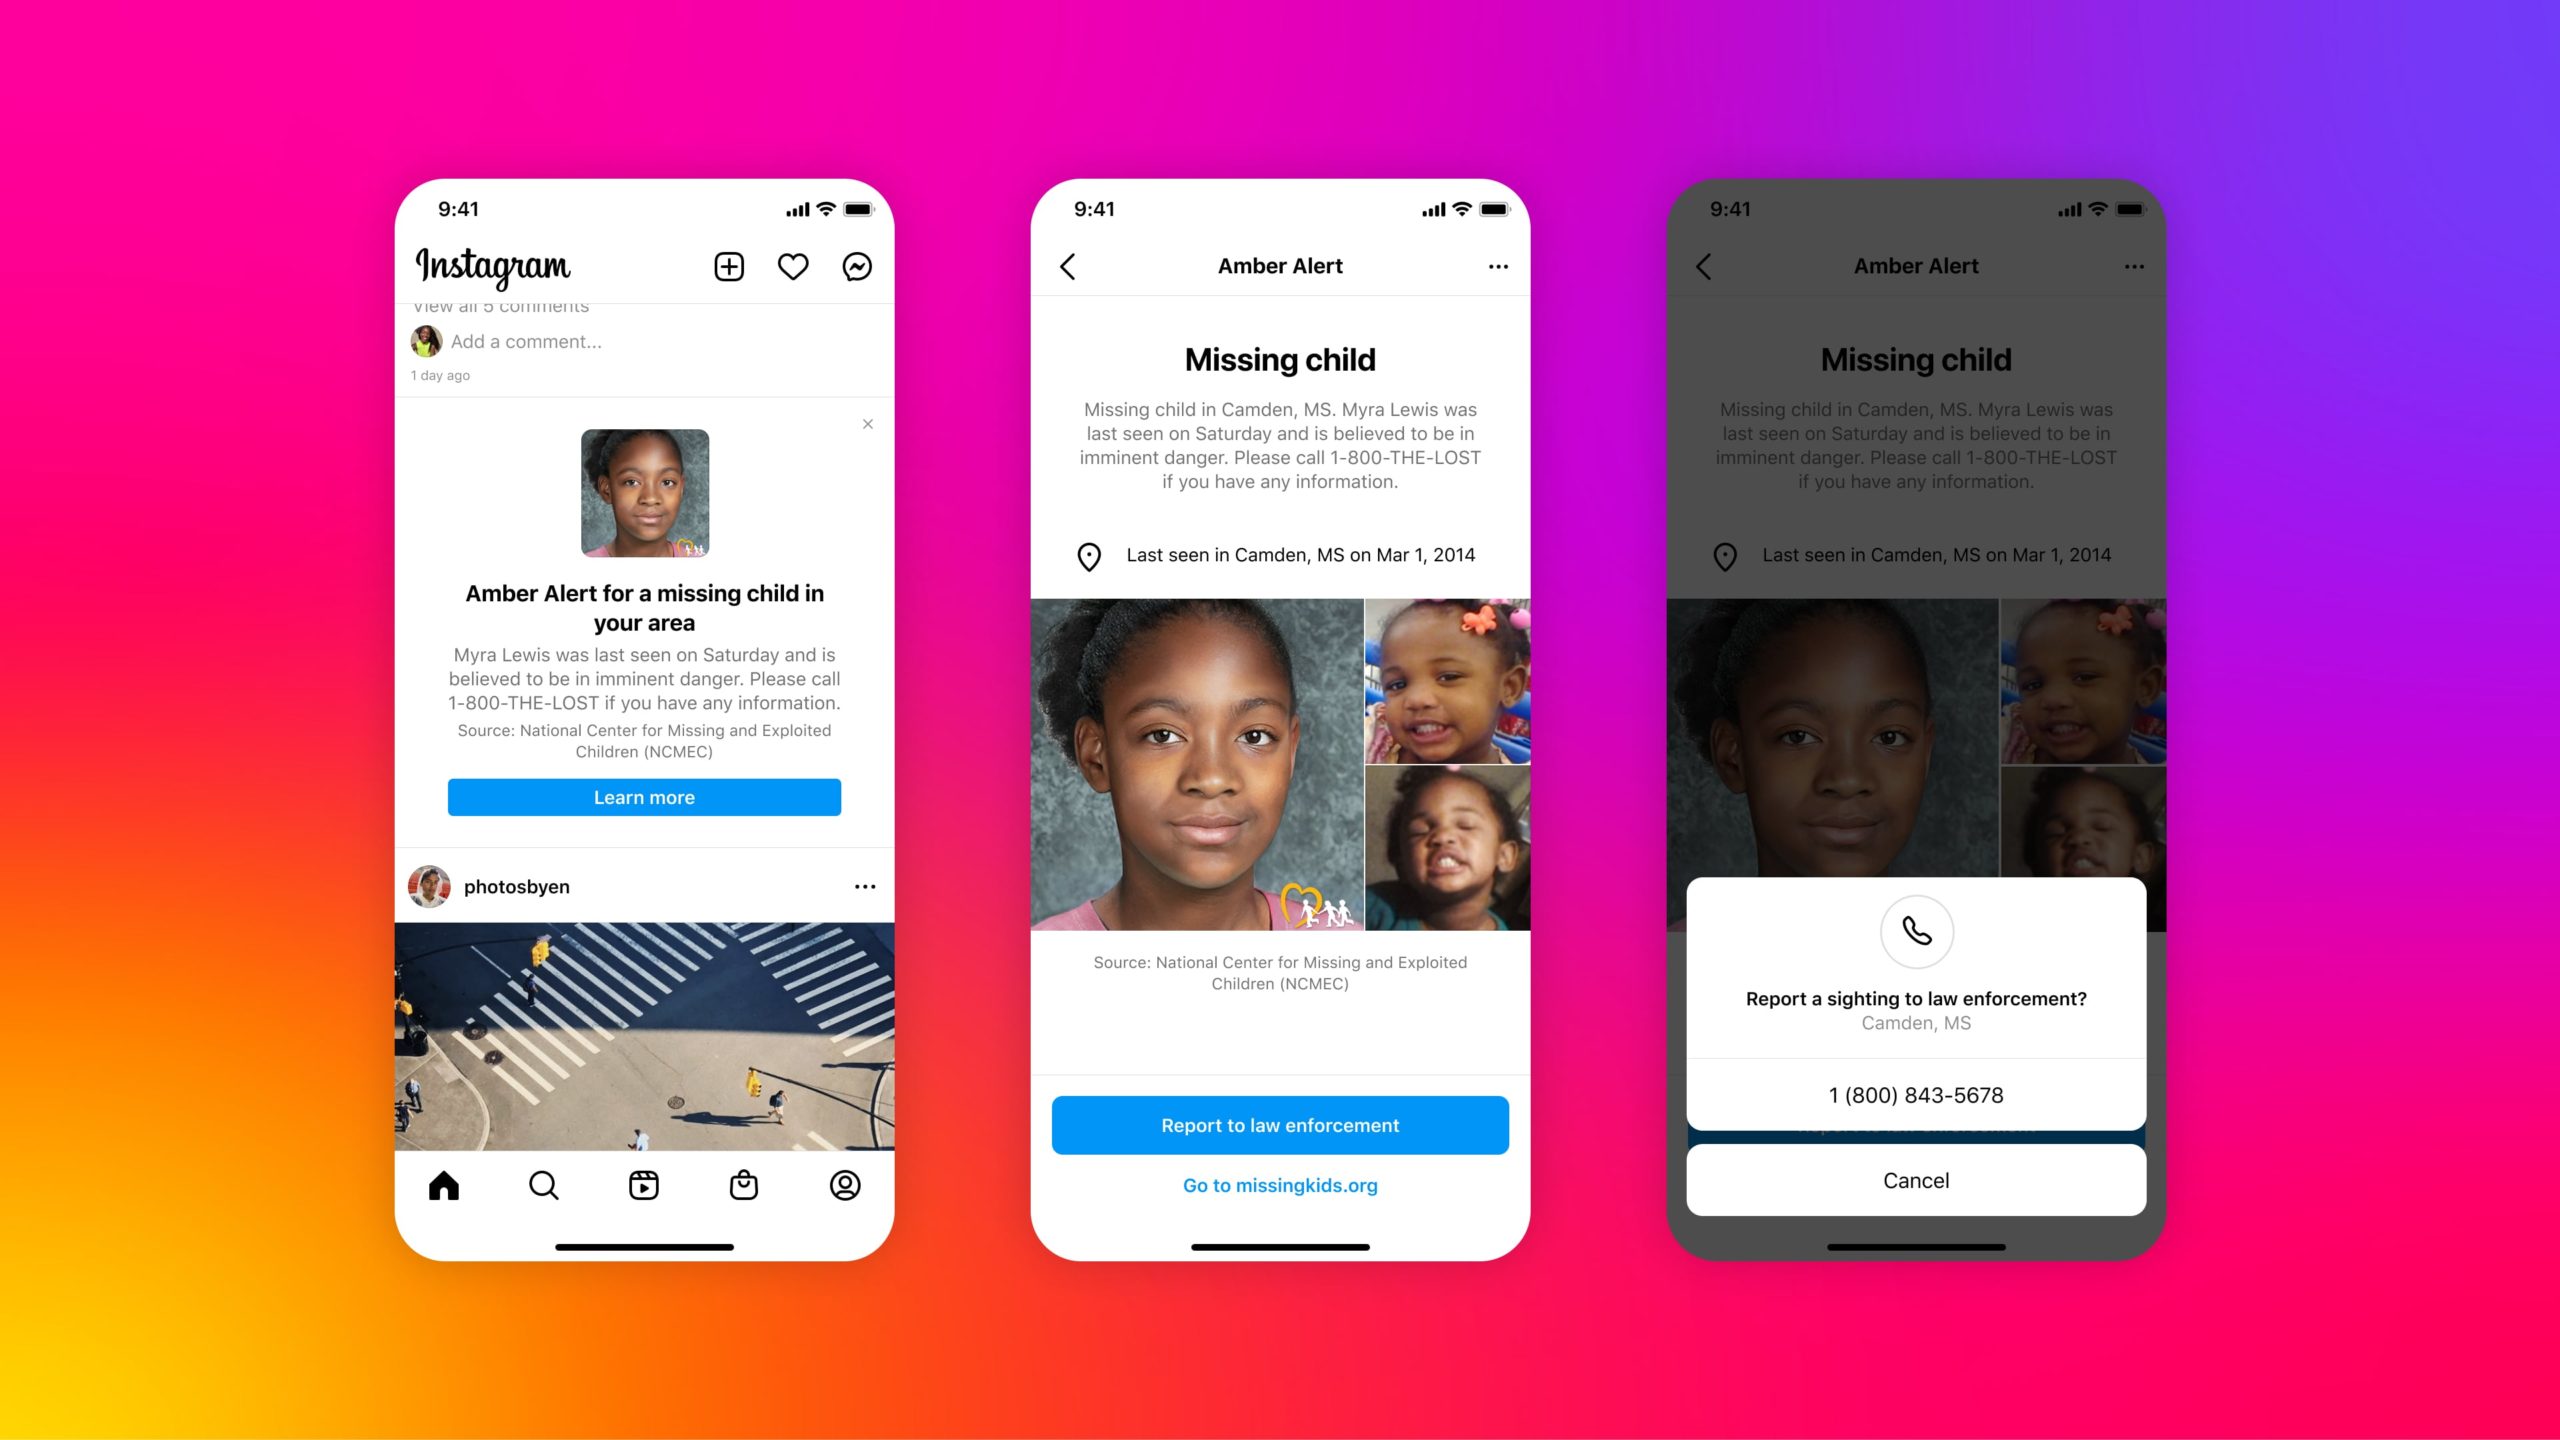 Instagram Uses Its Influence For Good With Launch Of In-Feed Amber Alerts